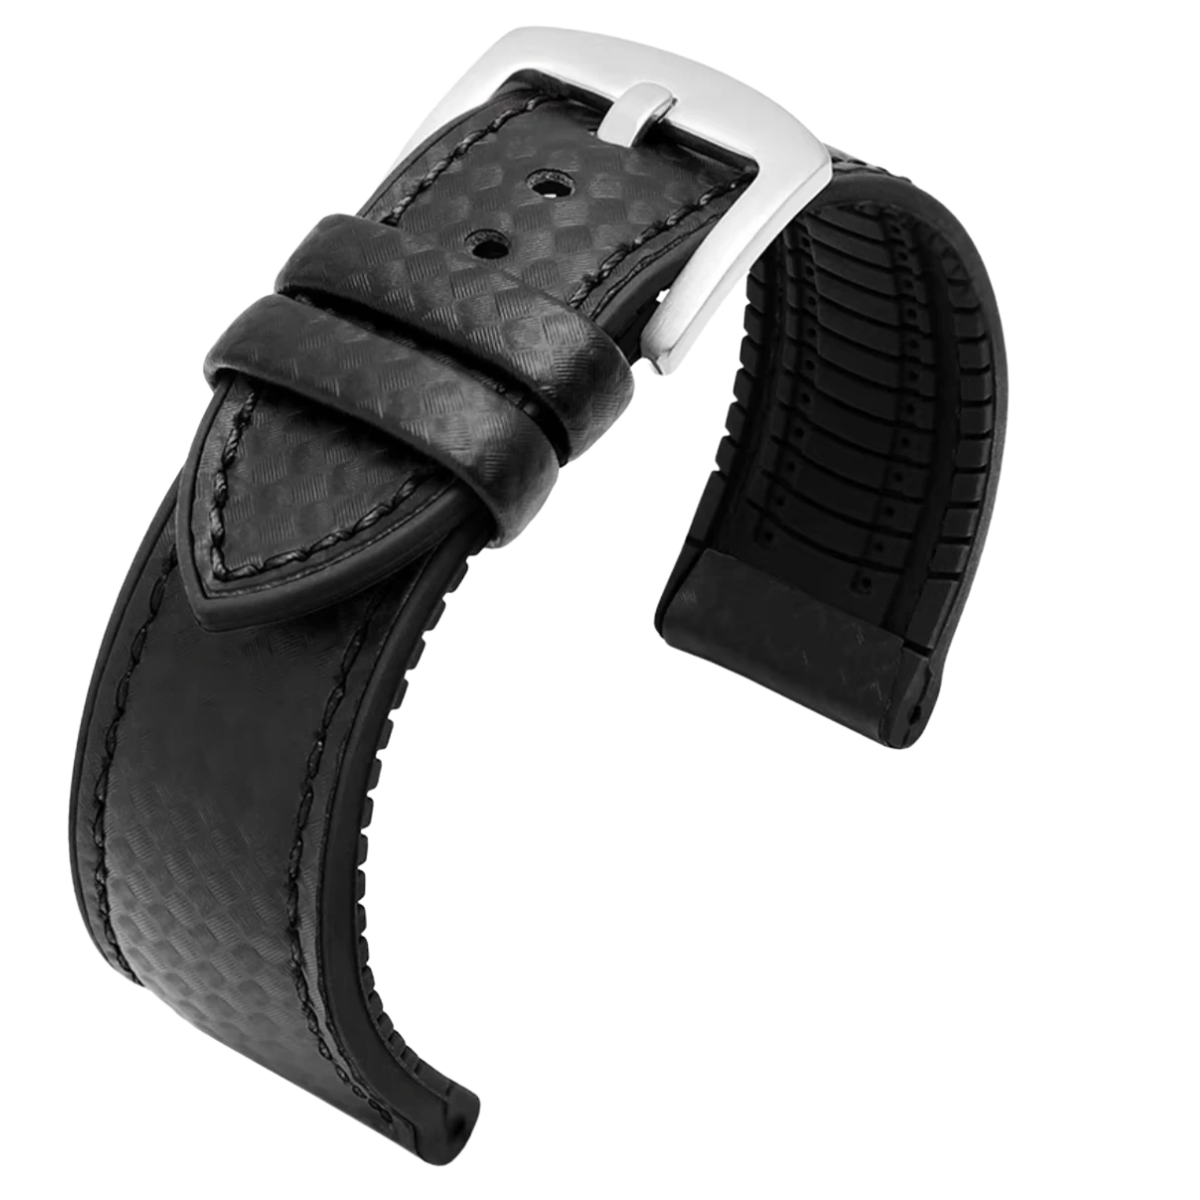 leather performance hybrid straps black watch bands 20mm 22mm